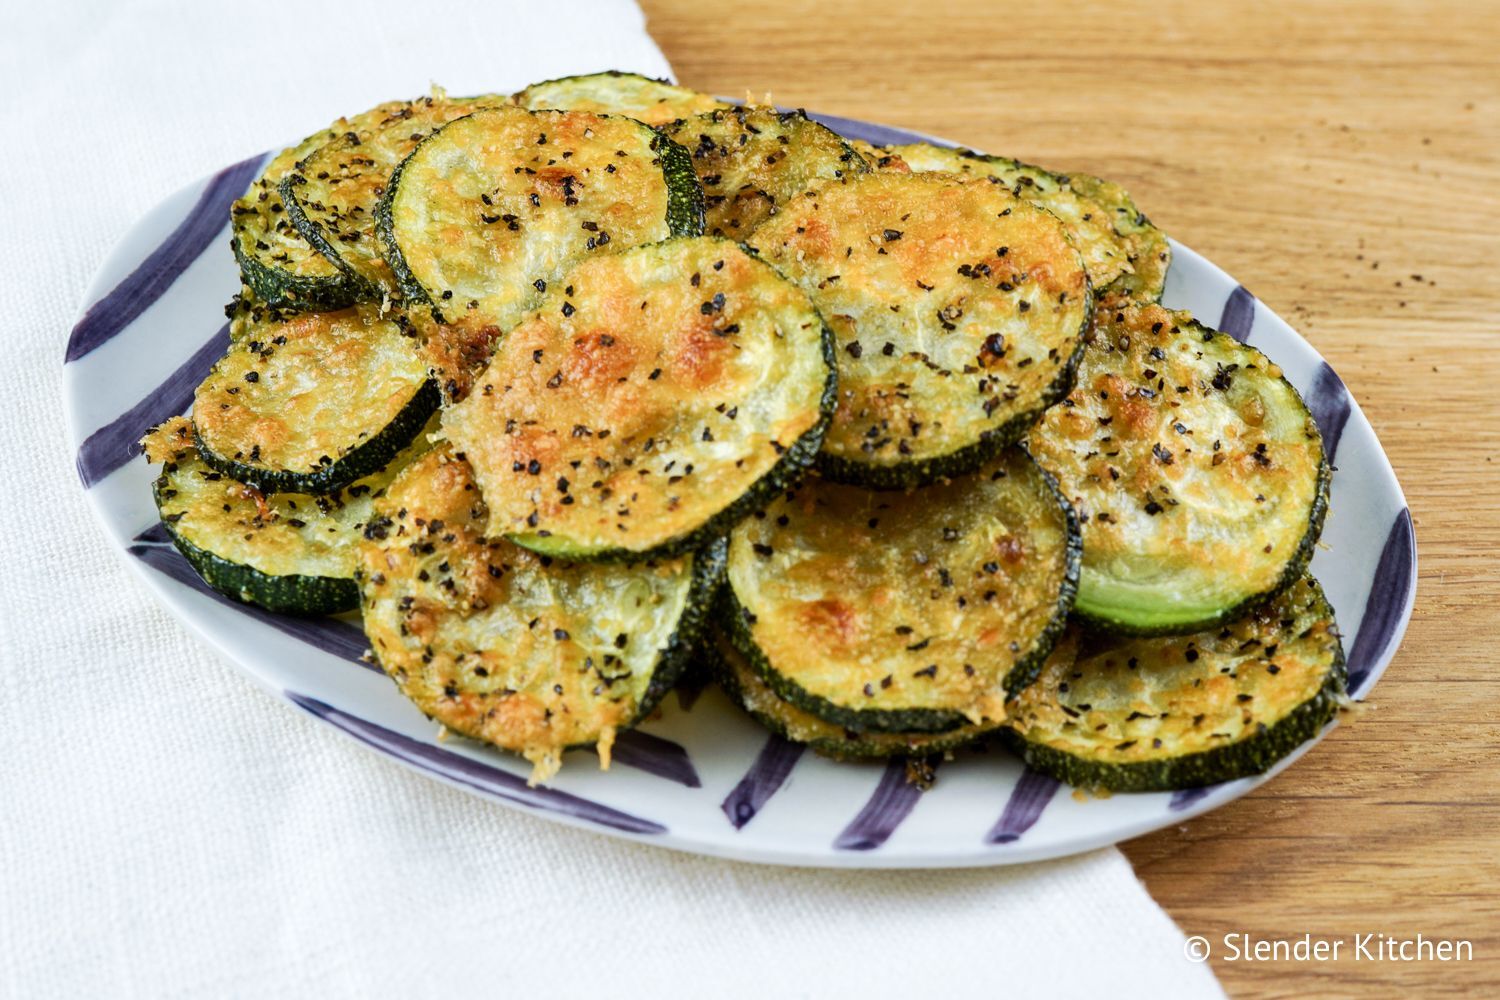 Black Pepper Parmesan zucchini chips with melted cheese and black pepper on thin slices of zucchini.